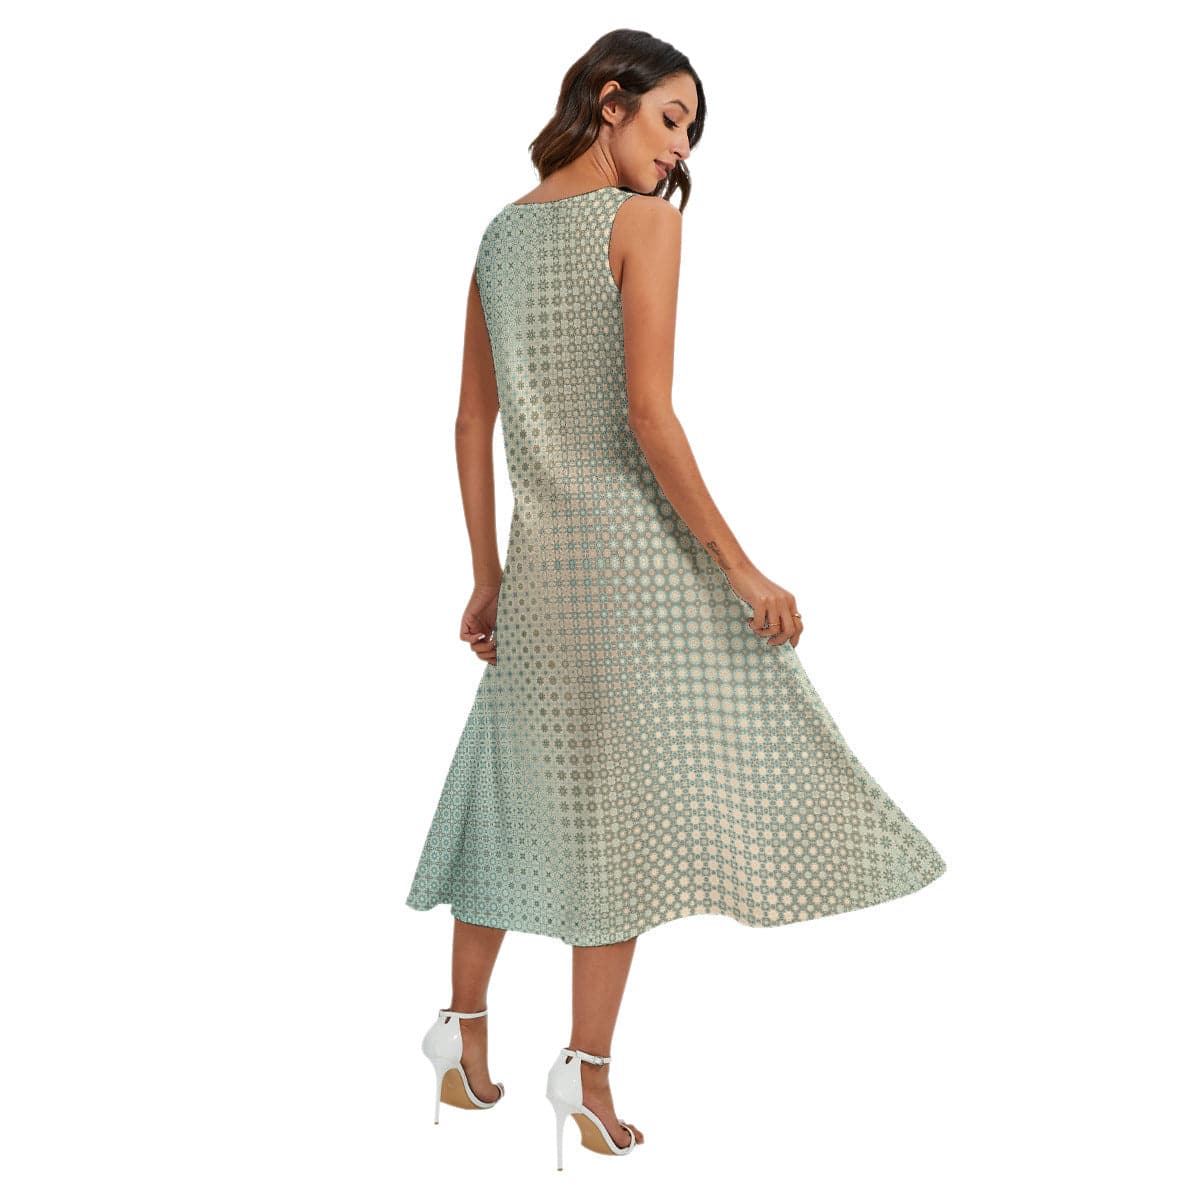 Sand and sea green patterned Women's  Easy going Sleeveless Dress With Diagonal Pocket, by Sensus sT